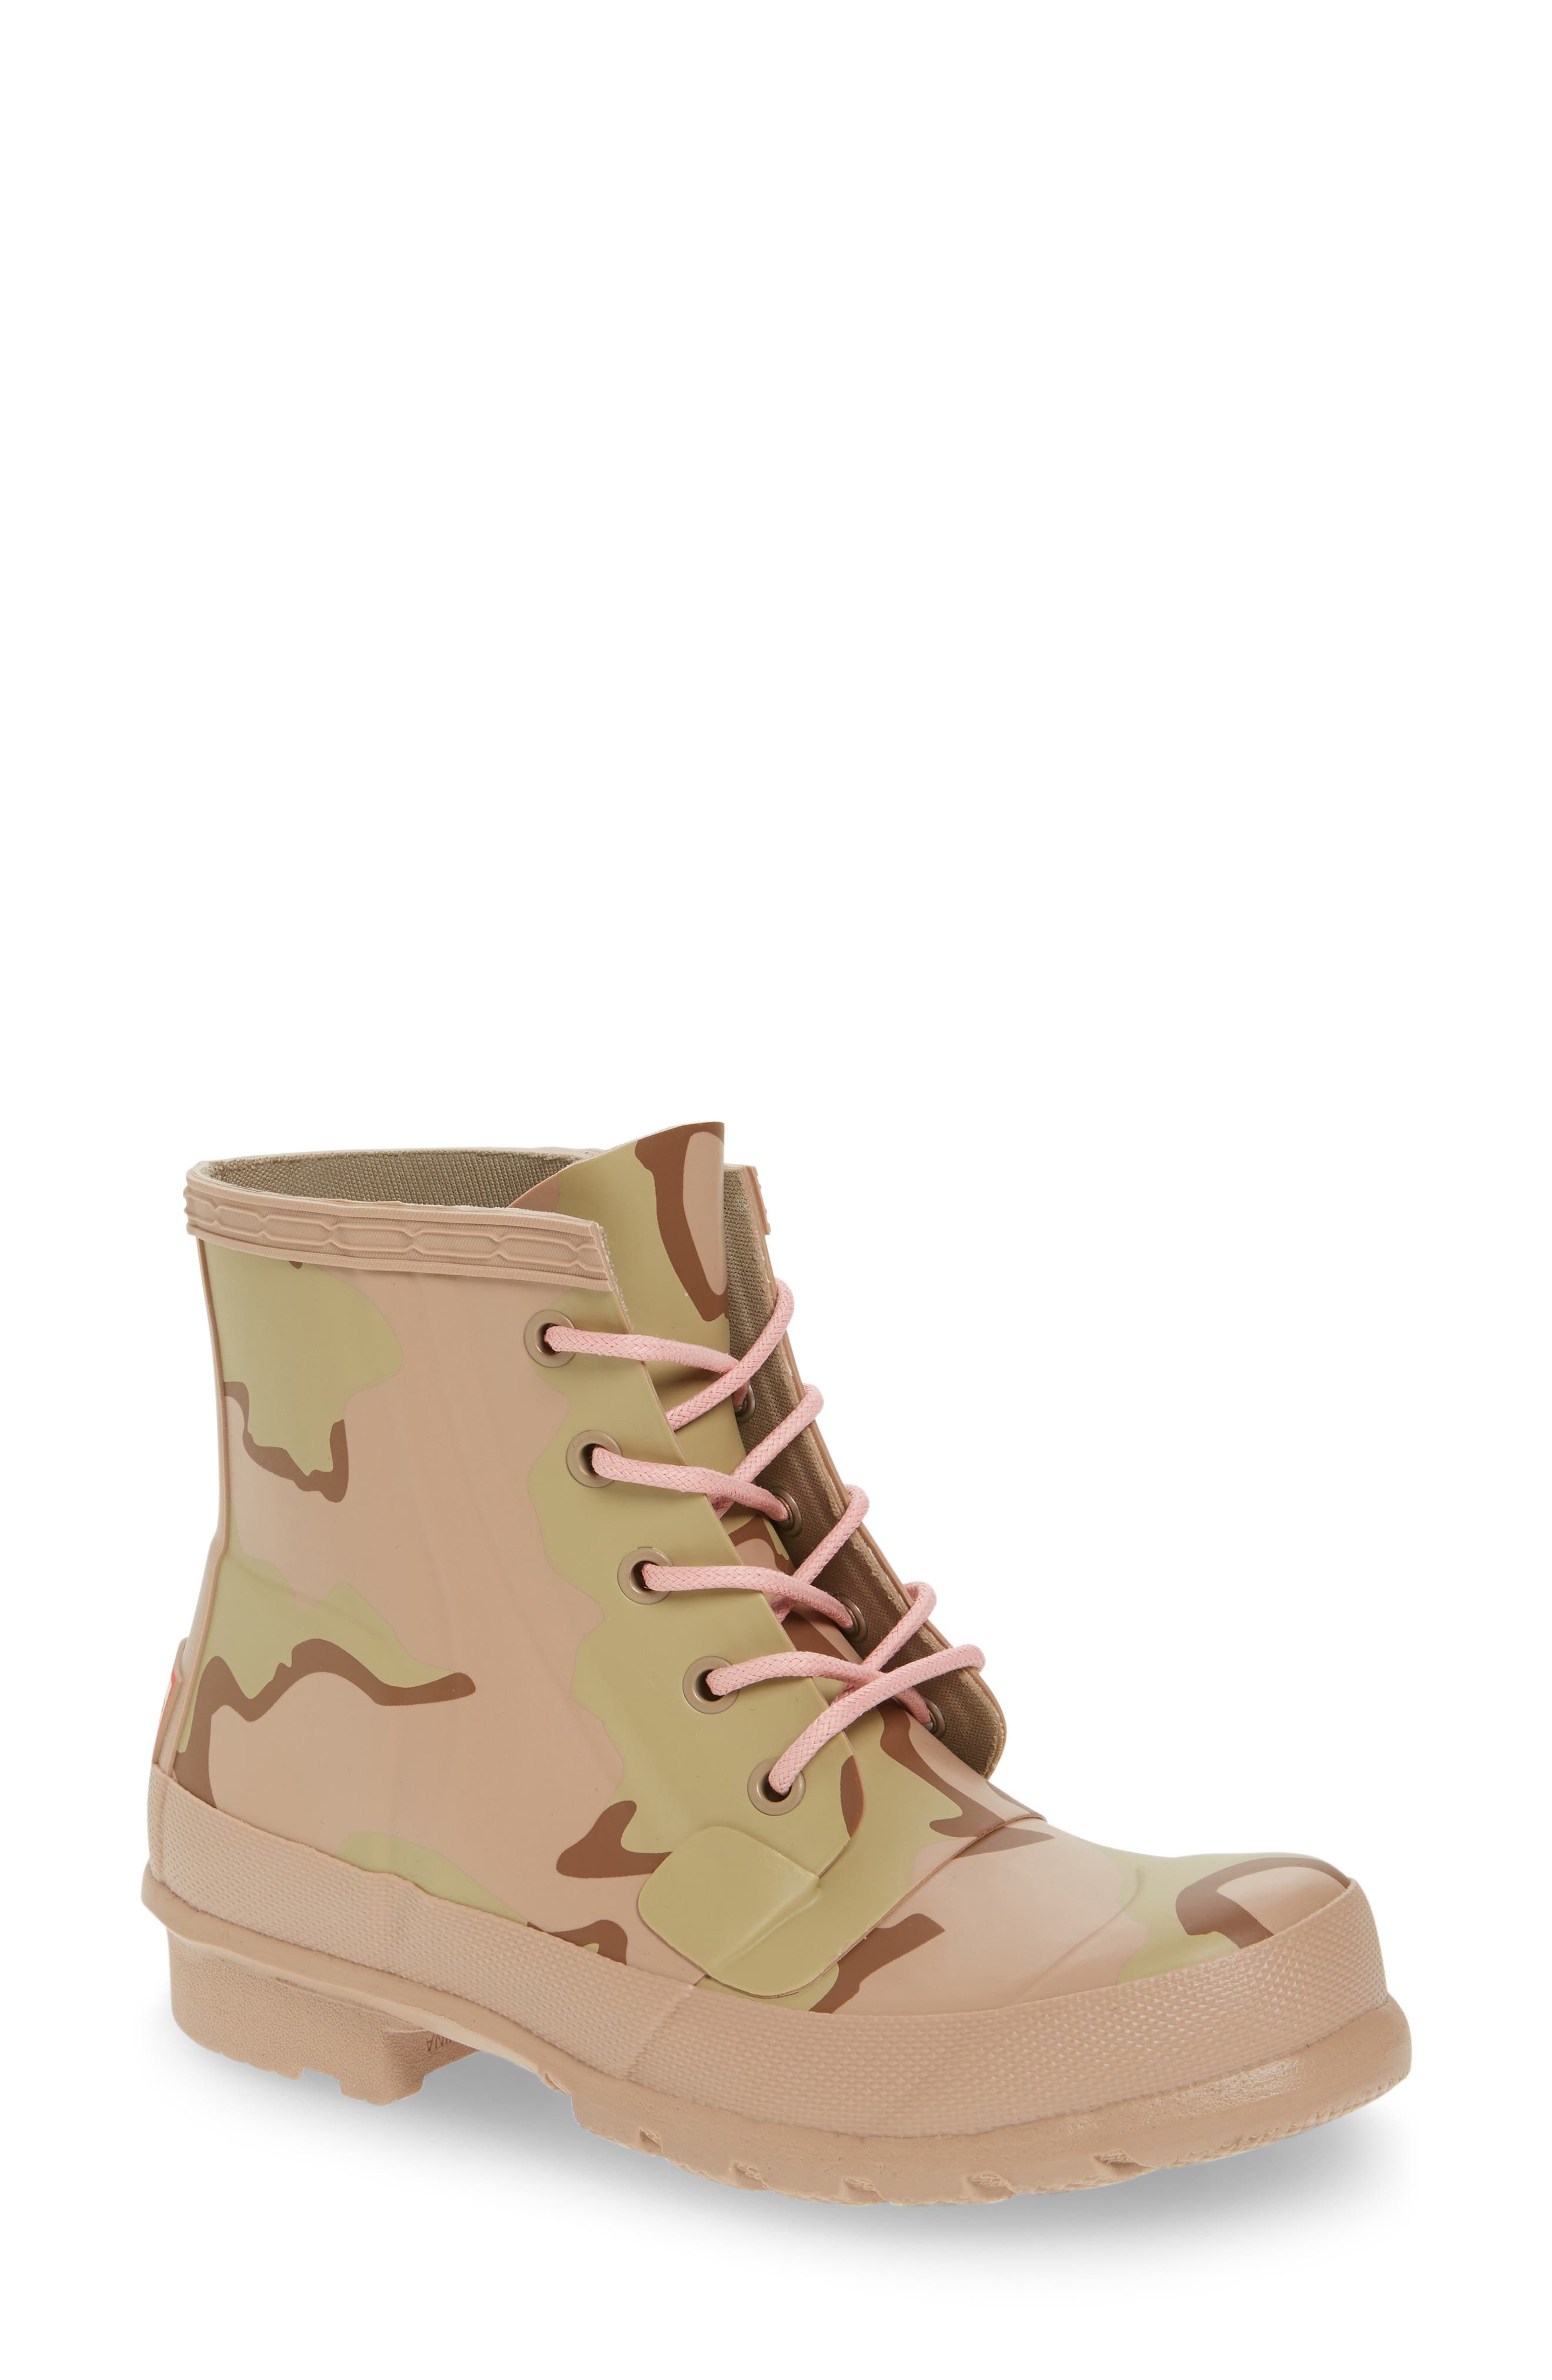 lace up hunter boots womens